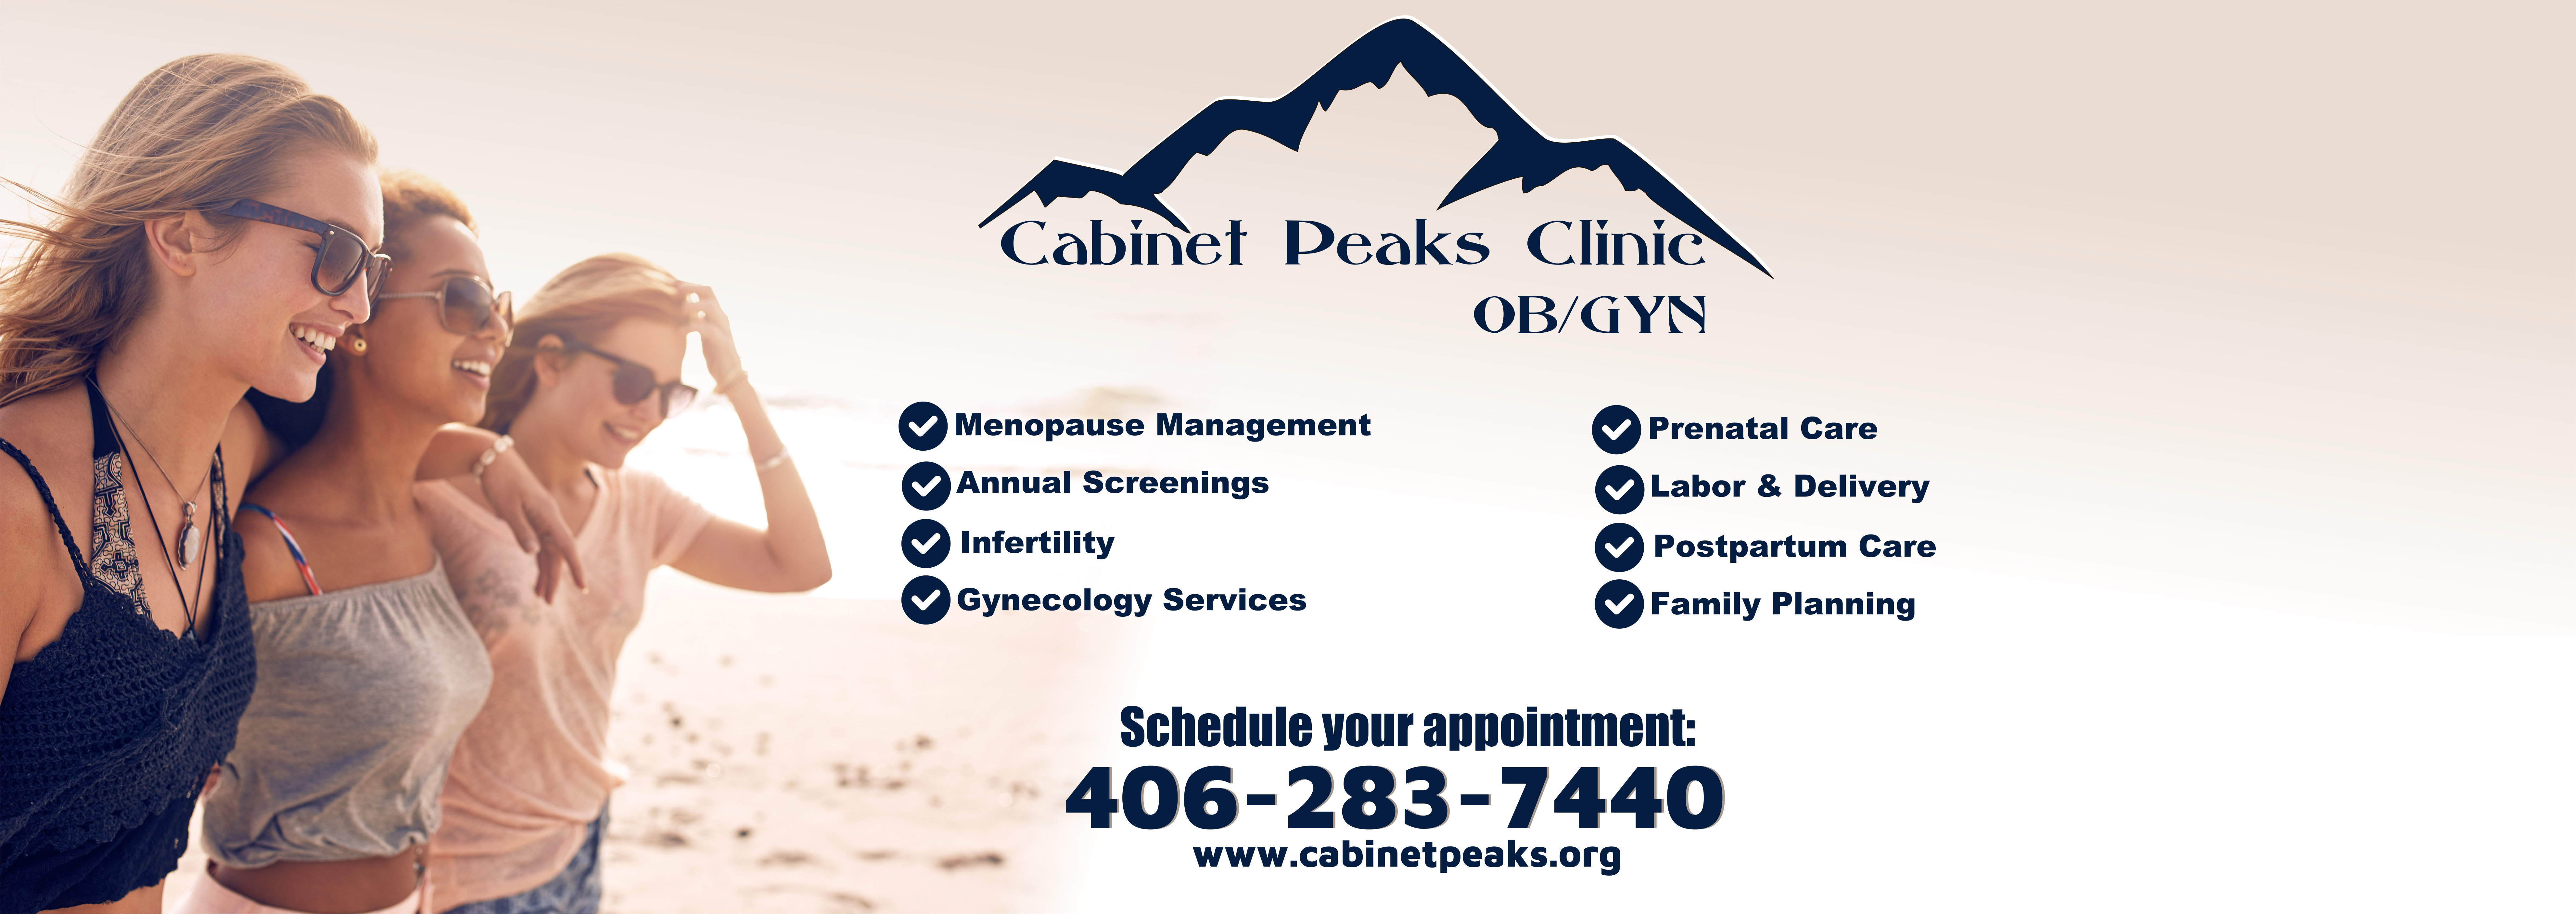 YOUR PARTNER IN WOMEN'S HEALTH!

* Routine and High Risk OB Services
* Annual Screenings
* Infertility 
* Gynecology Services


406-283-7440
www.cabinetpeaks.org